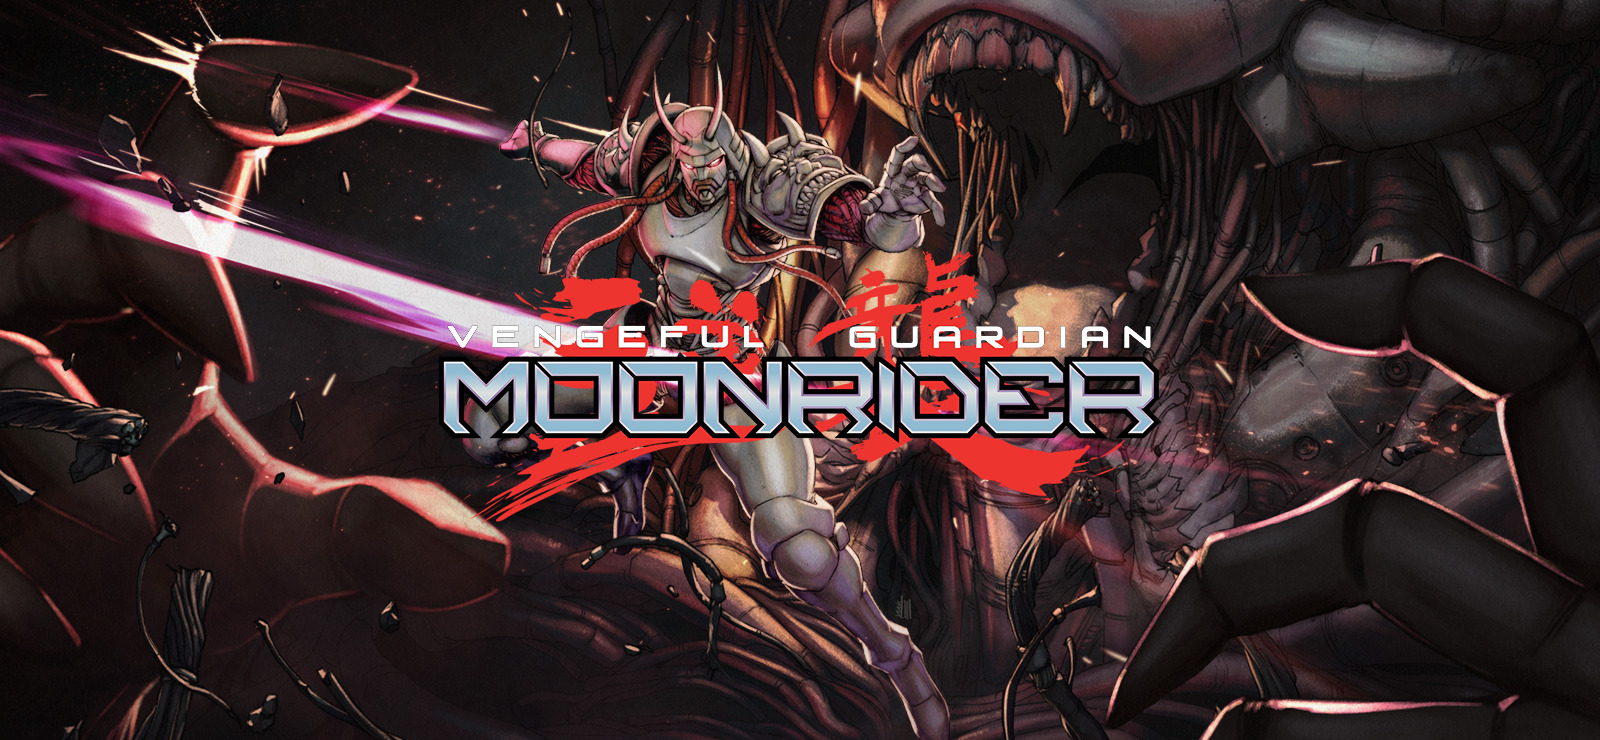 Vengeful Guardian Moonrider - First Edition Switch